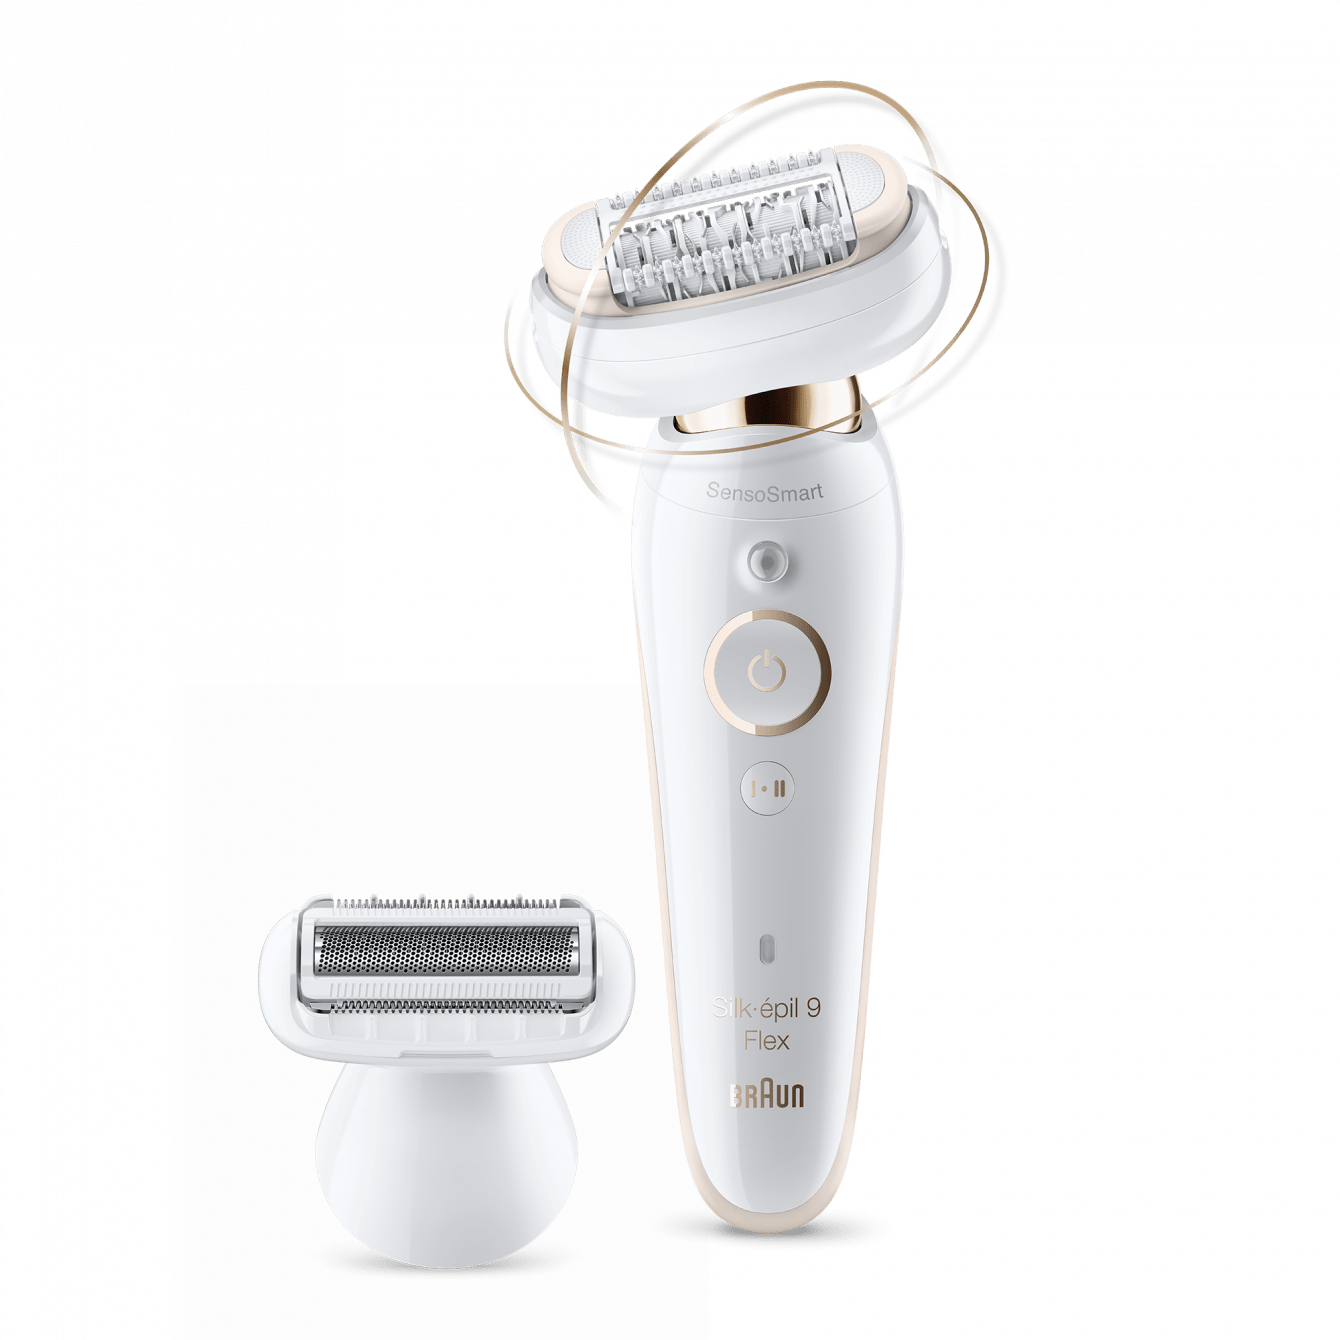 Braun presents the new devices for hair removal and reveals the habits of Italian women